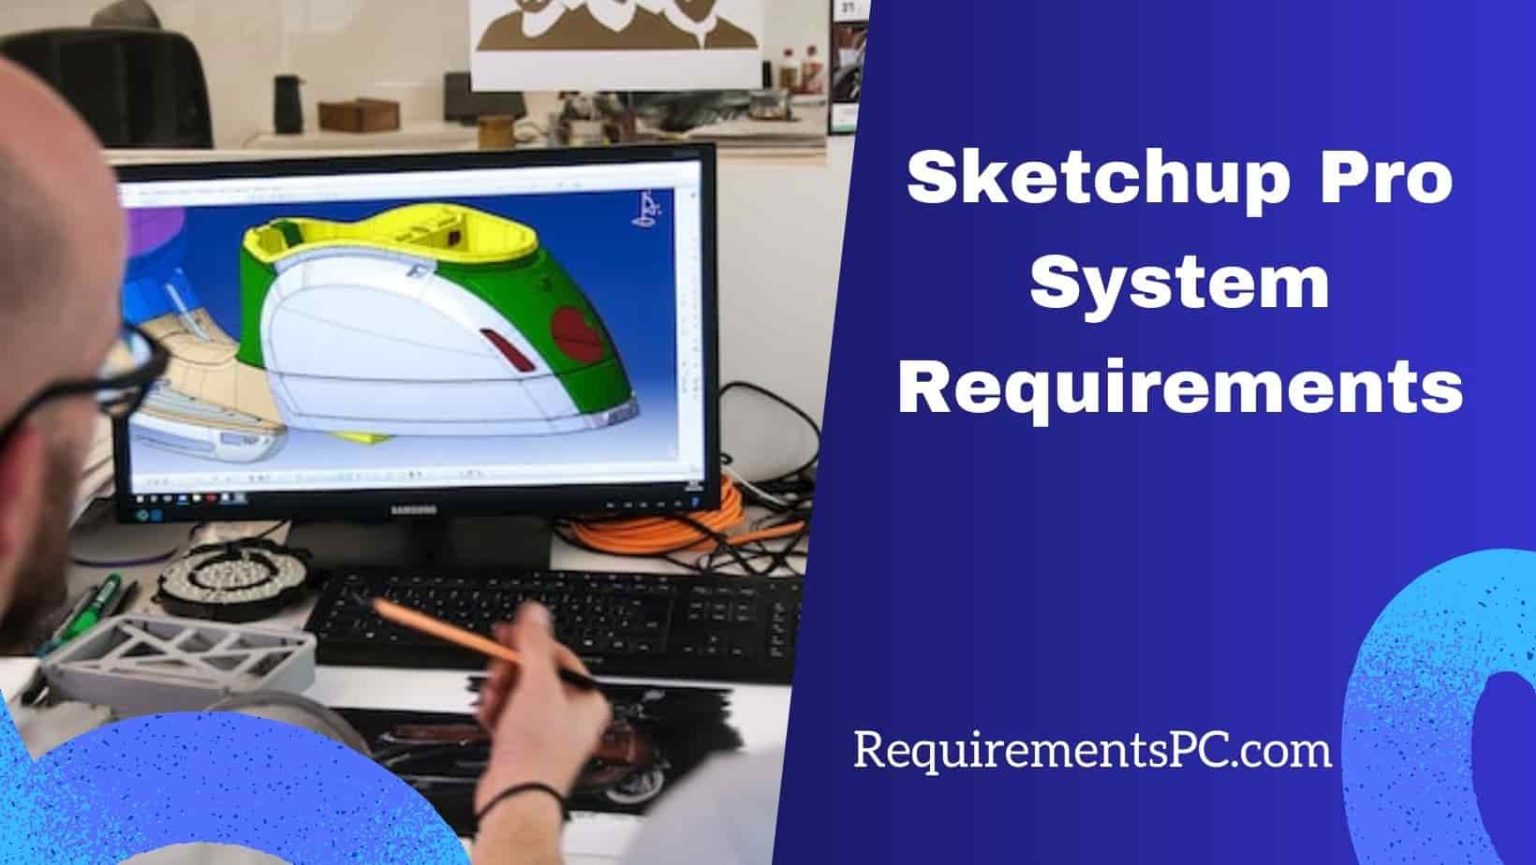 Sketchup Pro System Requirements